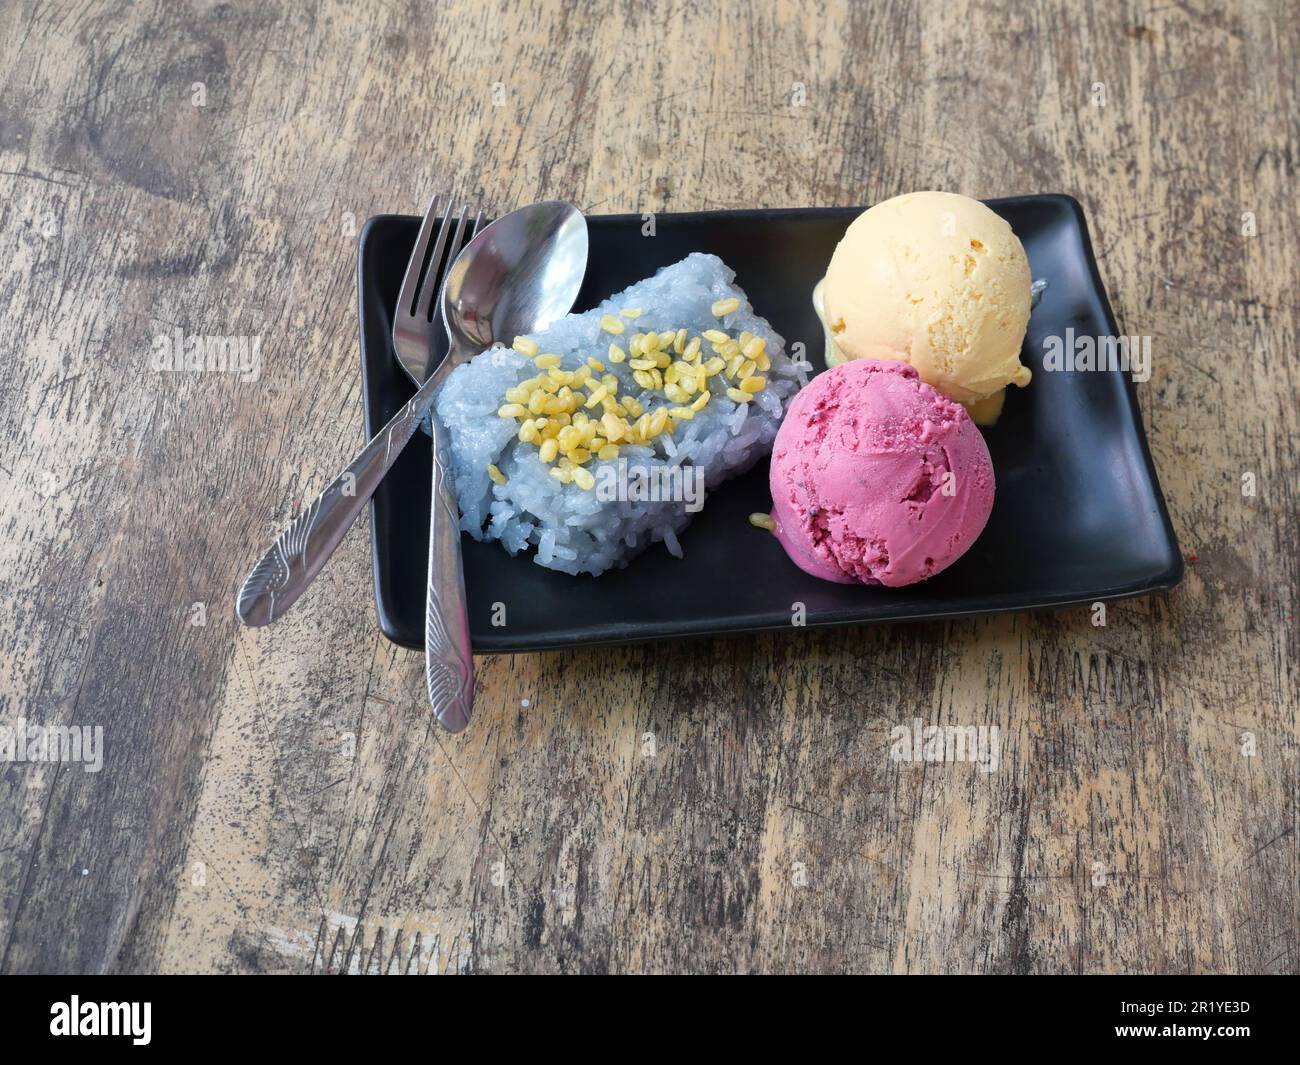 Mulberry and passion fruit ice cream with blue glutinous rice steamed with butterfly pea flowers, Two red and yellow ice creams with spoon and fork Stock Photo